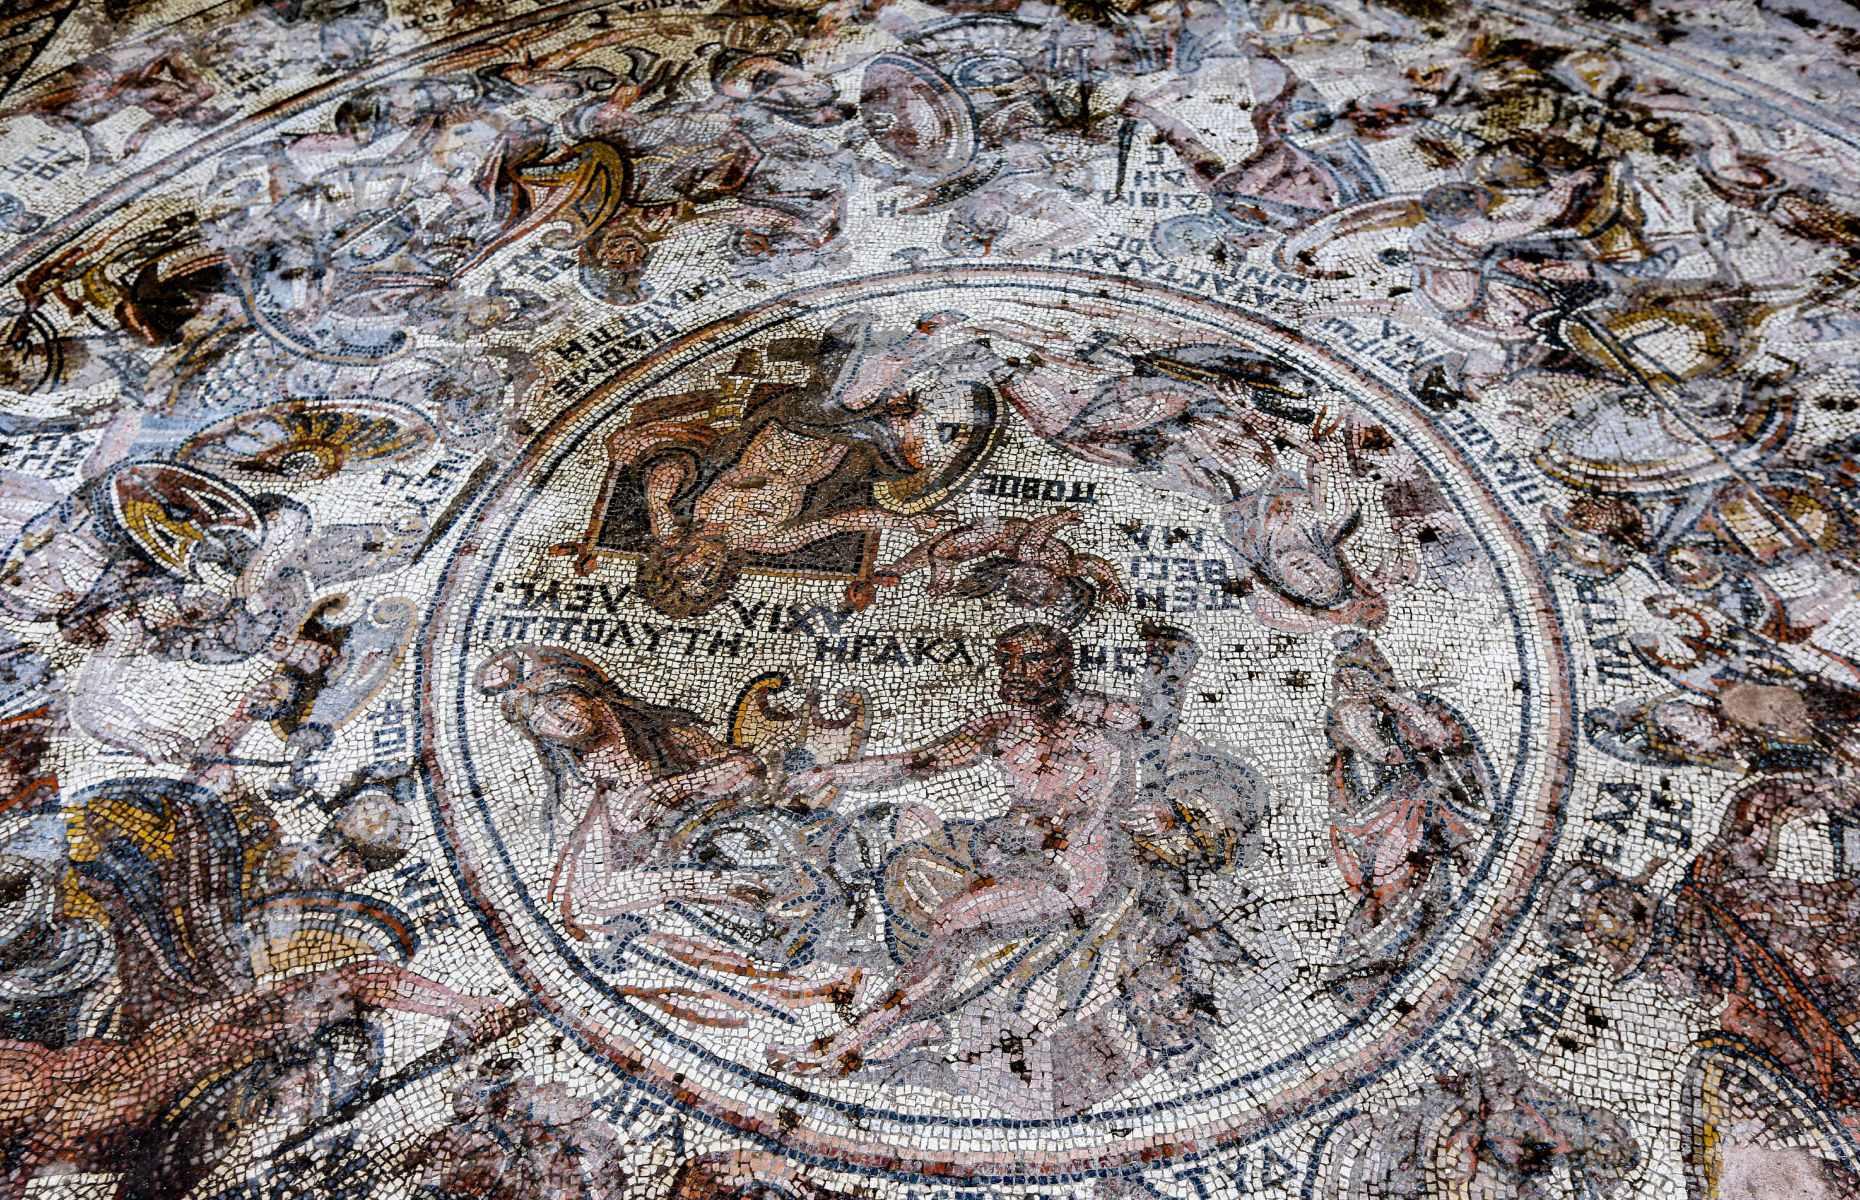 <p>In October 2022, archaeologists found this 1,600-year-old mosaic in Rastan in northern Syria, which the government only seized back from rebels in 2018. Thought to be the floor of an ancient bathhouse, the unusually intact 1,300-square-foot (120 sqm) art piece depicts the Trojan War, a semi-mythical conflict from more than 2,000 years ago between the ancient Greeks and the walled city of Troy. Constructed in the Roman era, the mosaic shows soldiers with swords and shields alongside mythical Amazons said to have fought alongside the Trojans.</p>